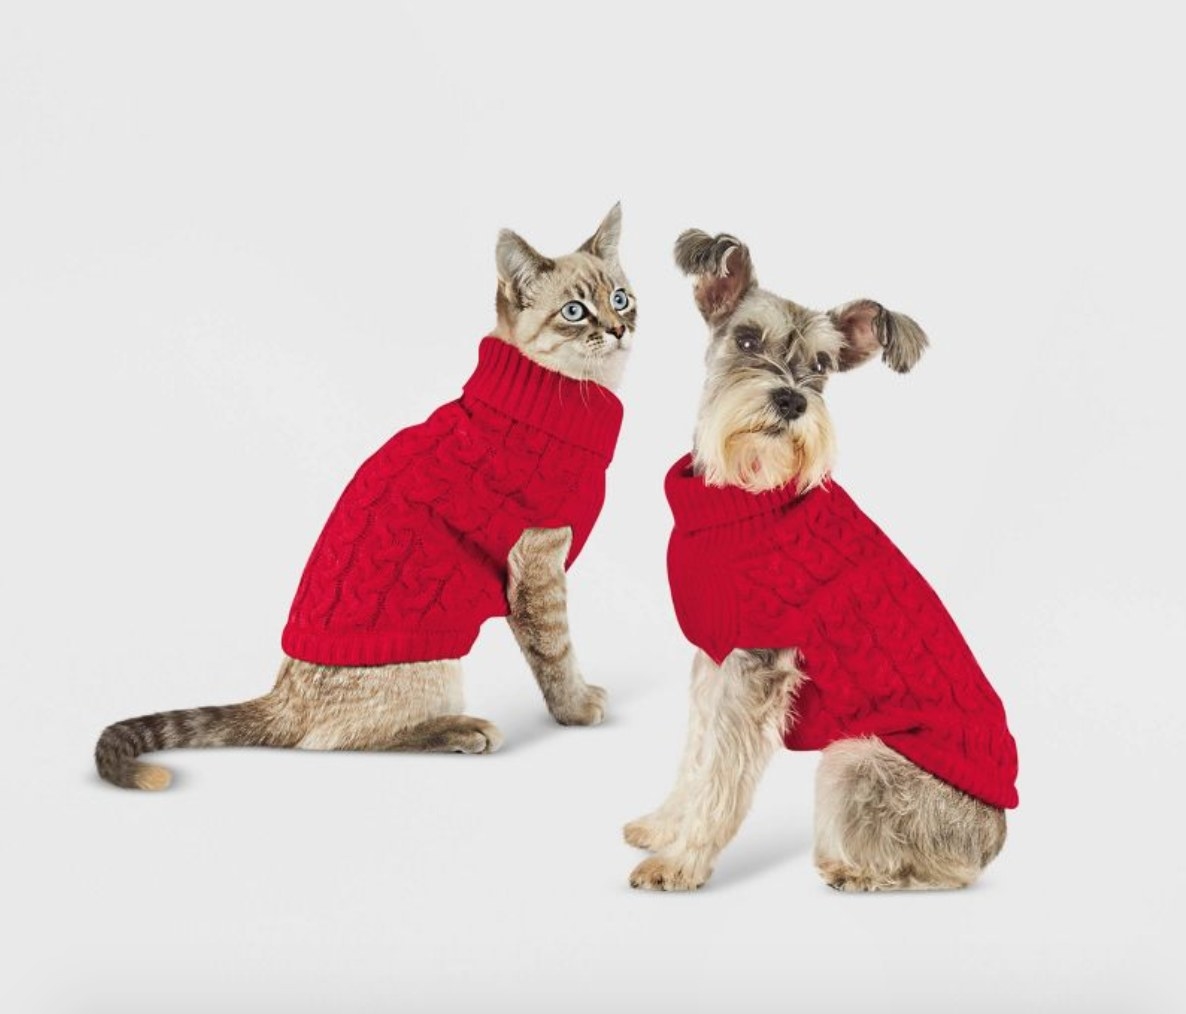 a cat and dog wearing the red sweaters